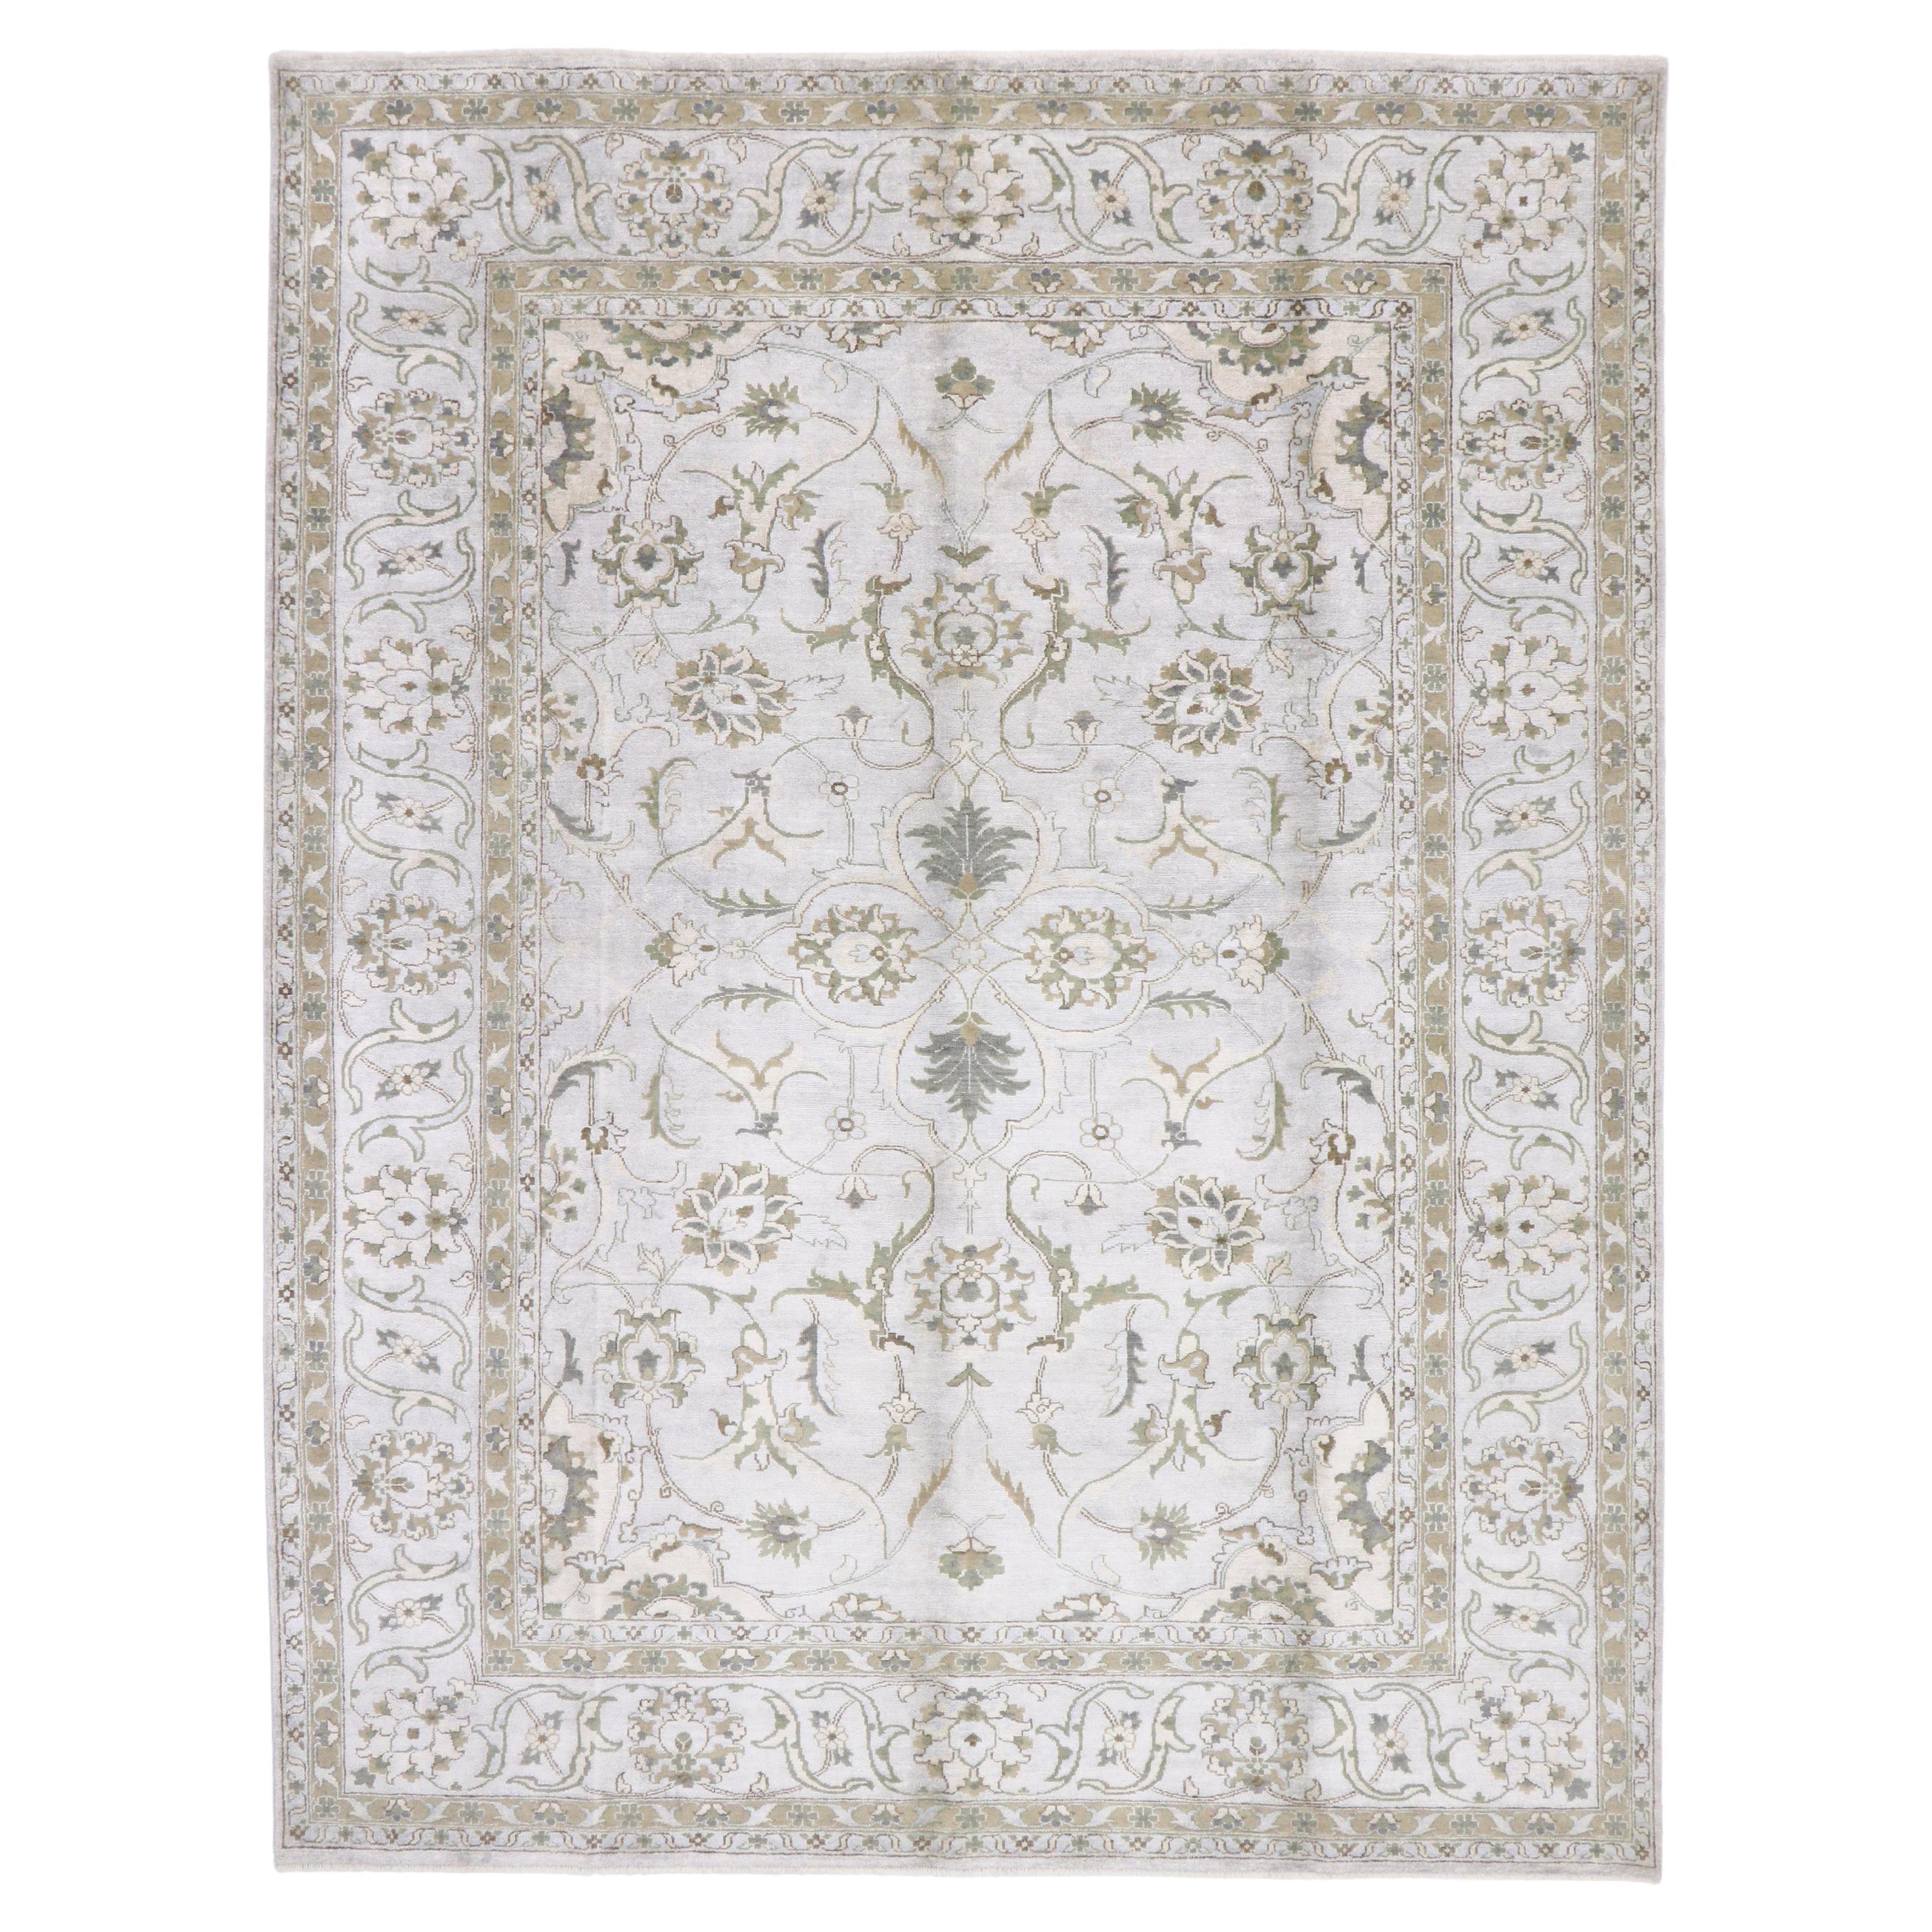 Modern Silk Indian Rug, Neoclassic Style Meets Luxe Contemporary Chippendale